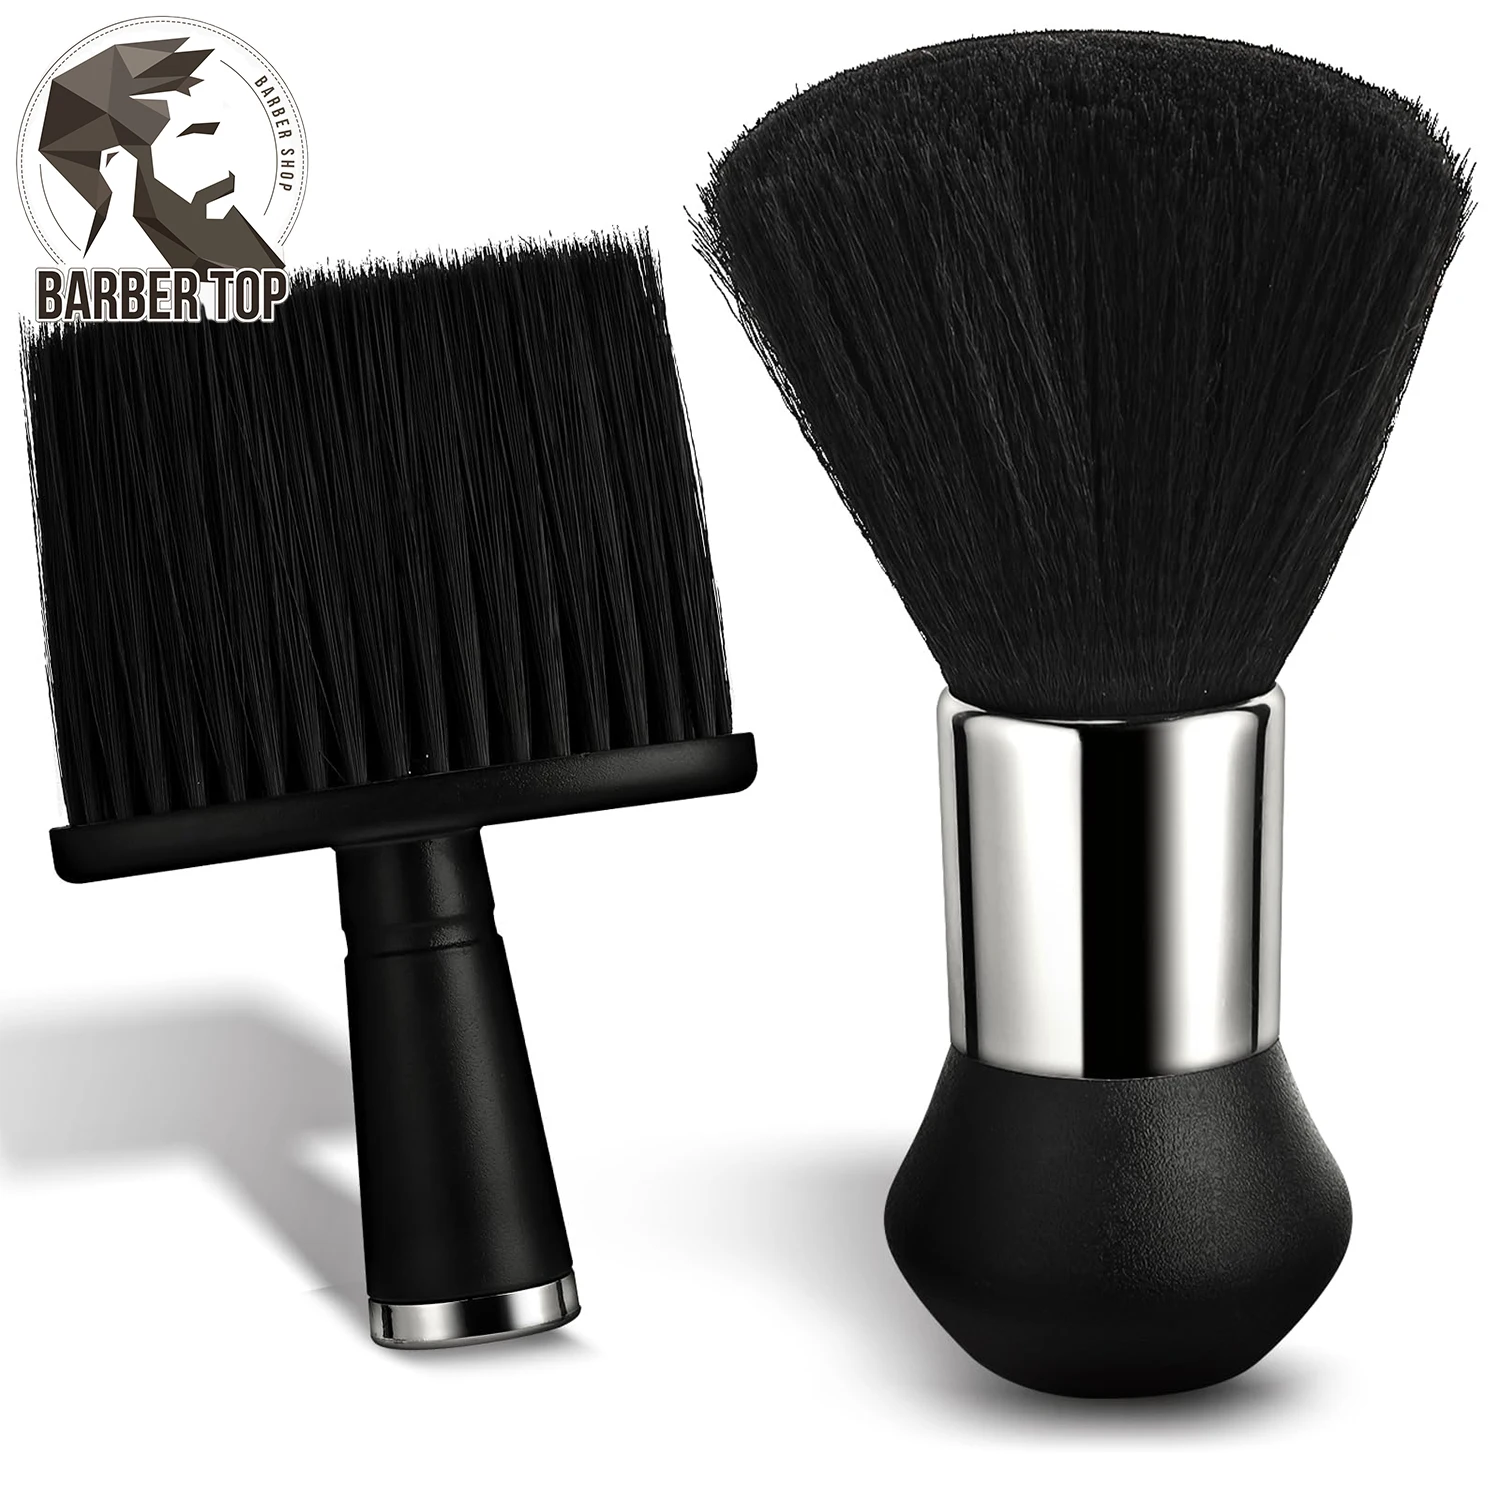 2Pcs Neck Duster Barber Remove Loose Hair Brush Professional Hair Cutting Brush Soft Hair Cleaning Brush Hairdressing Tools 2pcs good vacuum cleaner microfleece type p filter dust bag for bosch hoover hygienic professional bsg80000 468264 461707